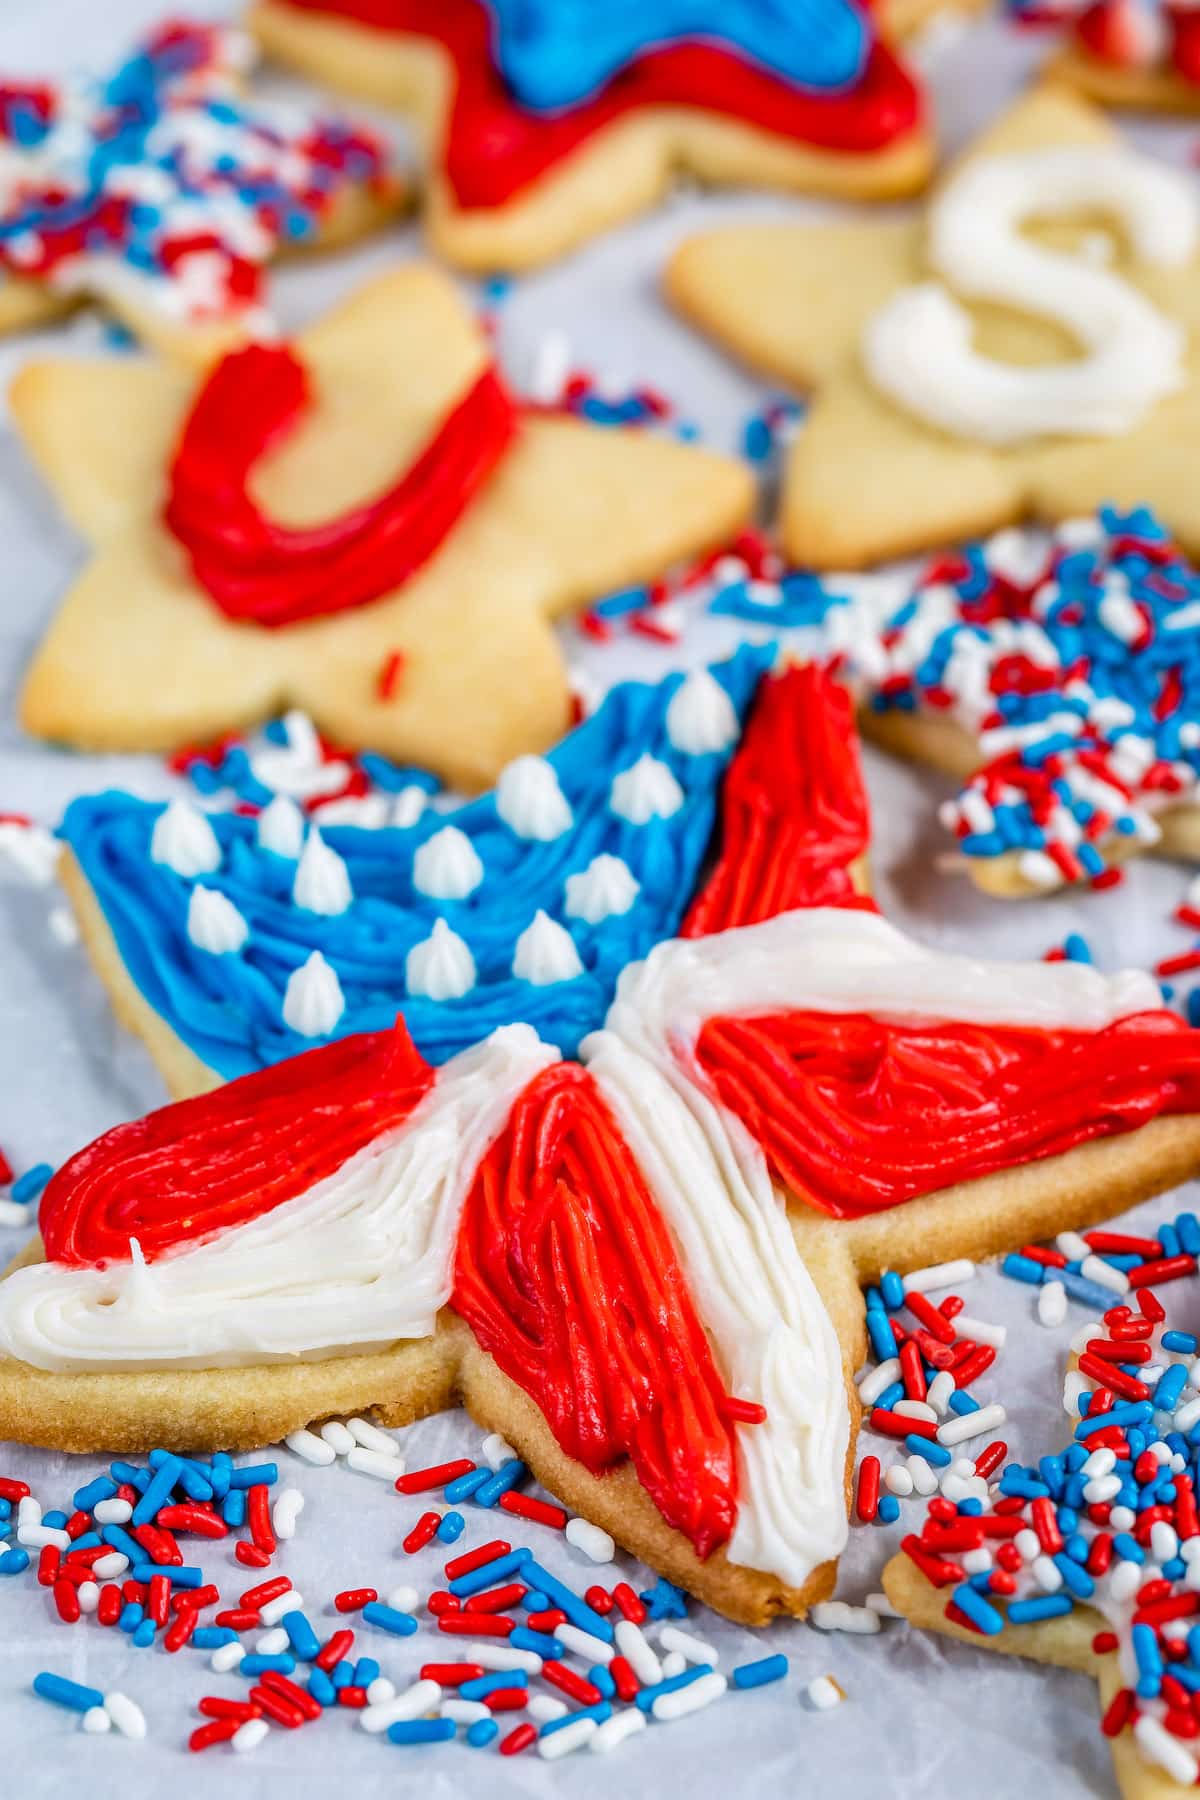 star cookie decorated like an american flag